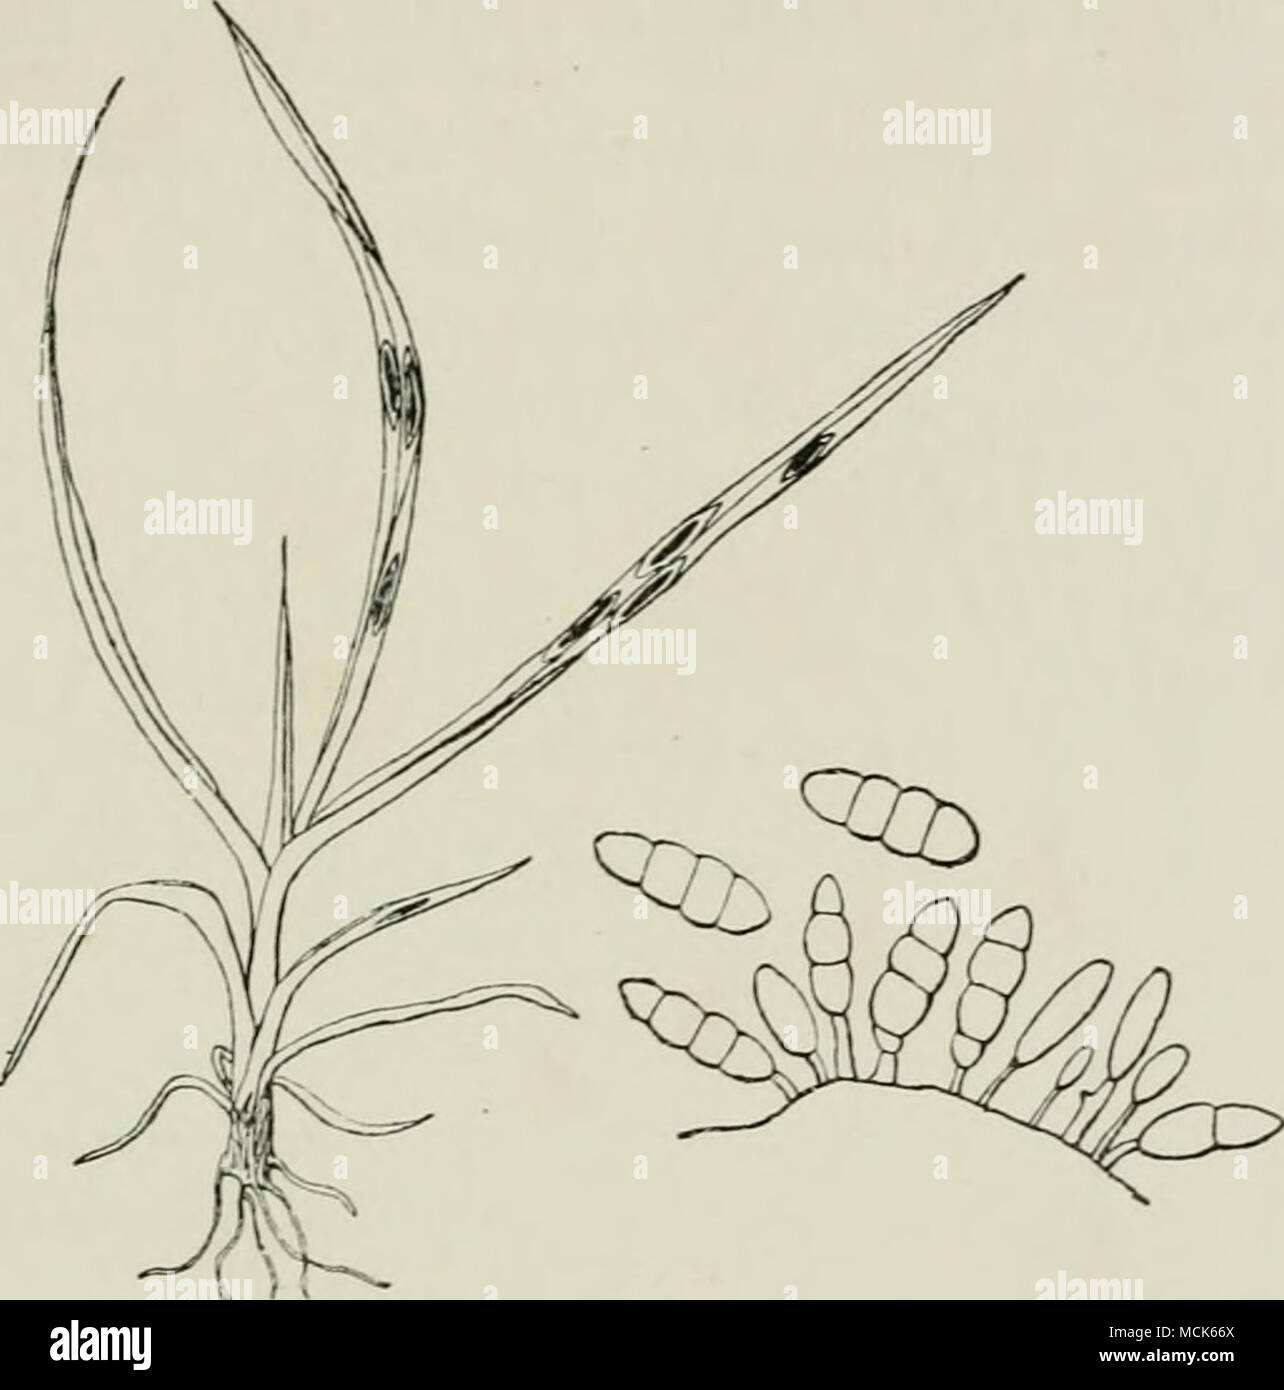 . Fig. 308.—MoMi&lt;josporiv.in album, (v. Tubeiif del.) conidia. Diseased plants may be found bearing this fungus only, frequently however it is in company with other fungi. Cercosporella. Conidia hyaline, similar to those of Ccrcospora, and produced from simple or branched hyaline conidiophores. Cercosporella persica Sacc. is parasitic on living leaves of peach. In America it has been known .since 1890, and receives the name of &quot; frosty mildew.&quot; It causes yellow spots on the lower surface of the leaf. C. pastinacae Karst. occurs on living leaves of cultivated parsnip. Stock Photo